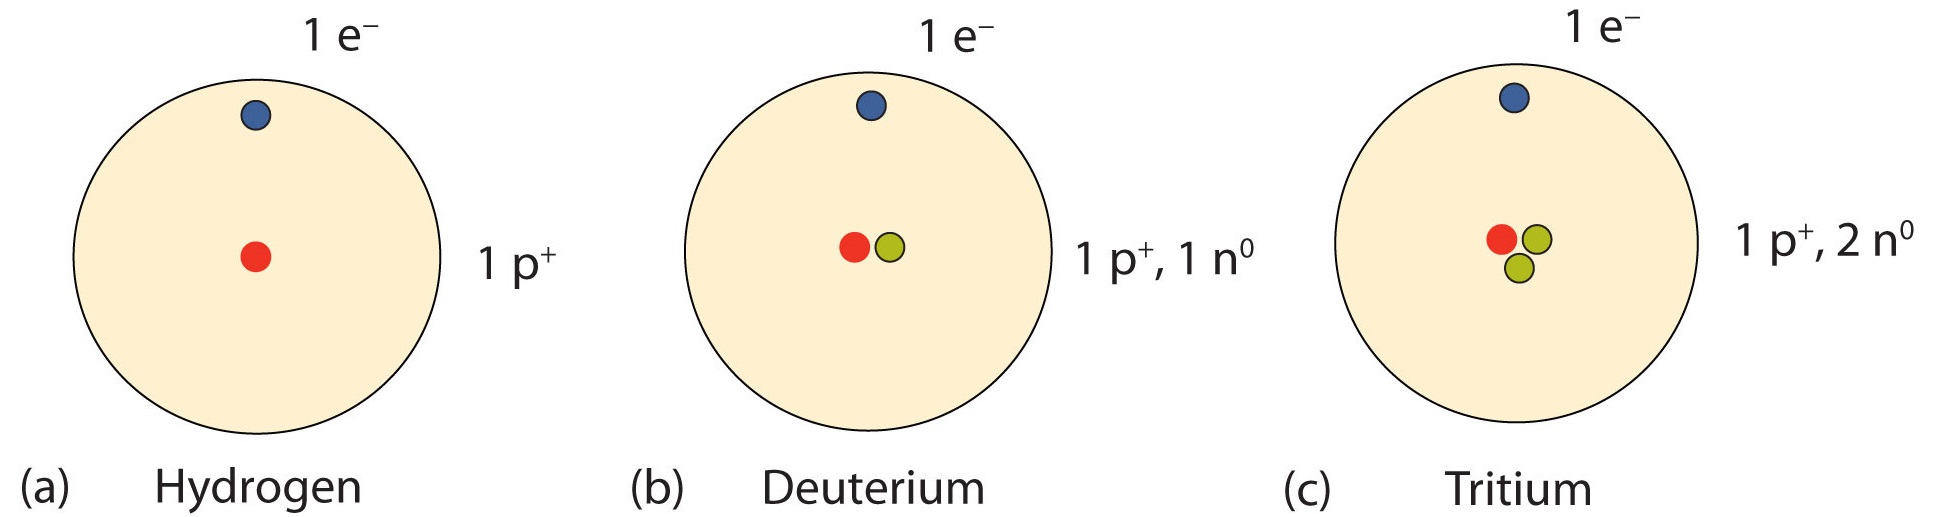 Isotopes of Hydrogen. Most hydrogen atoms have only a proton in the nucleus (